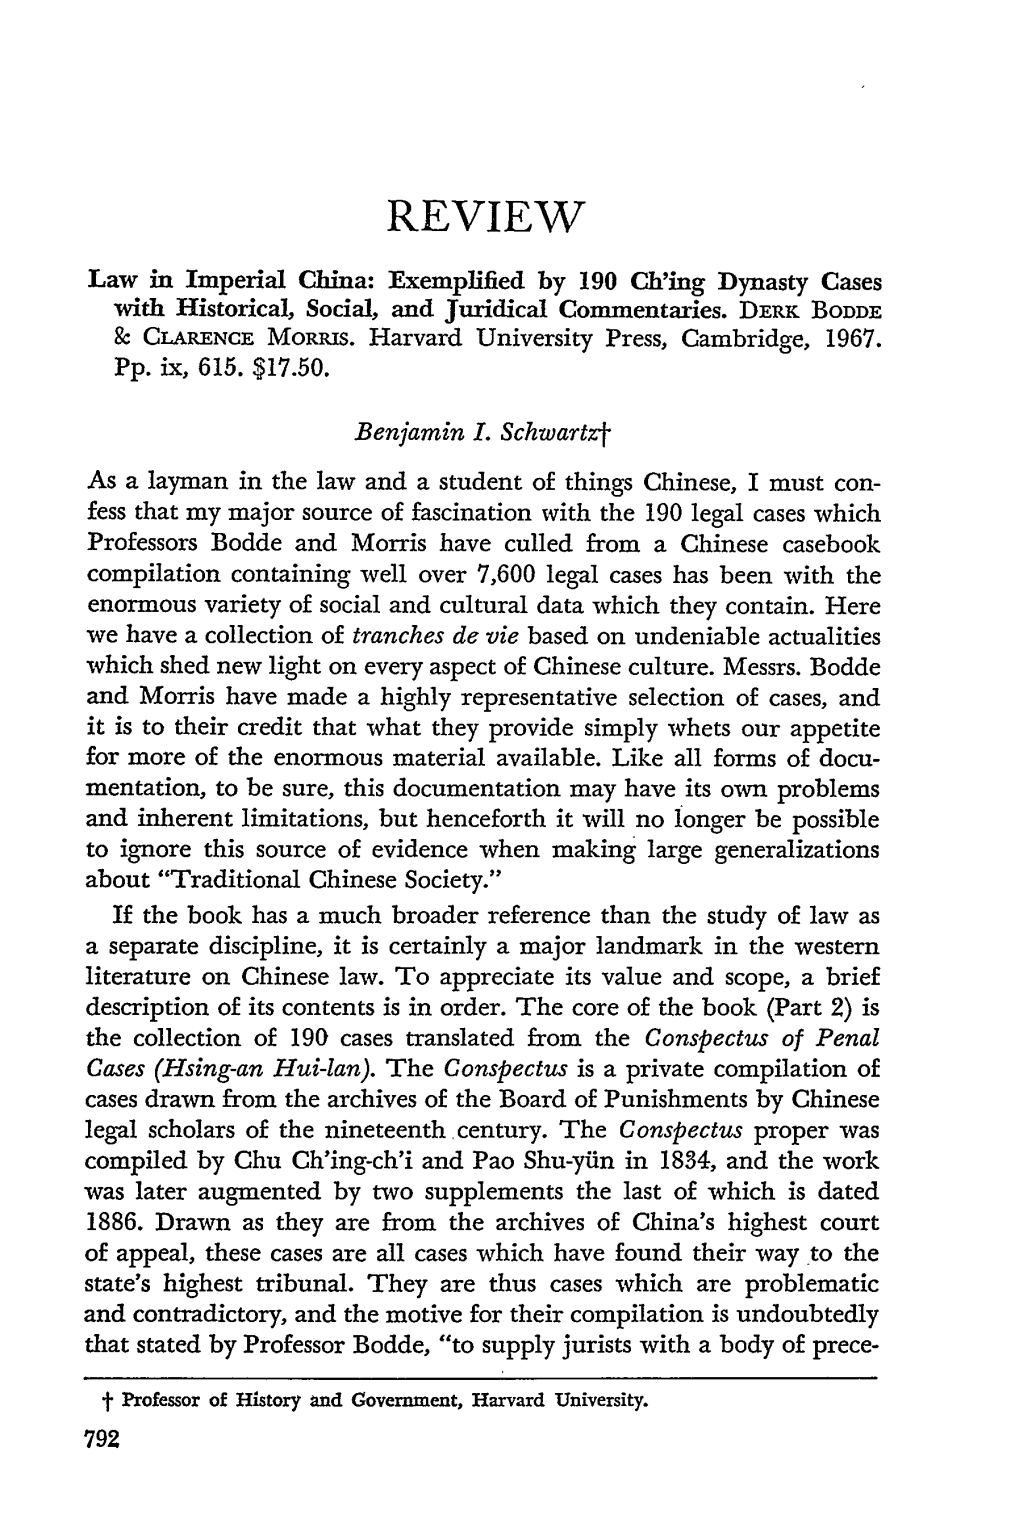 Review of Law in Imperial China